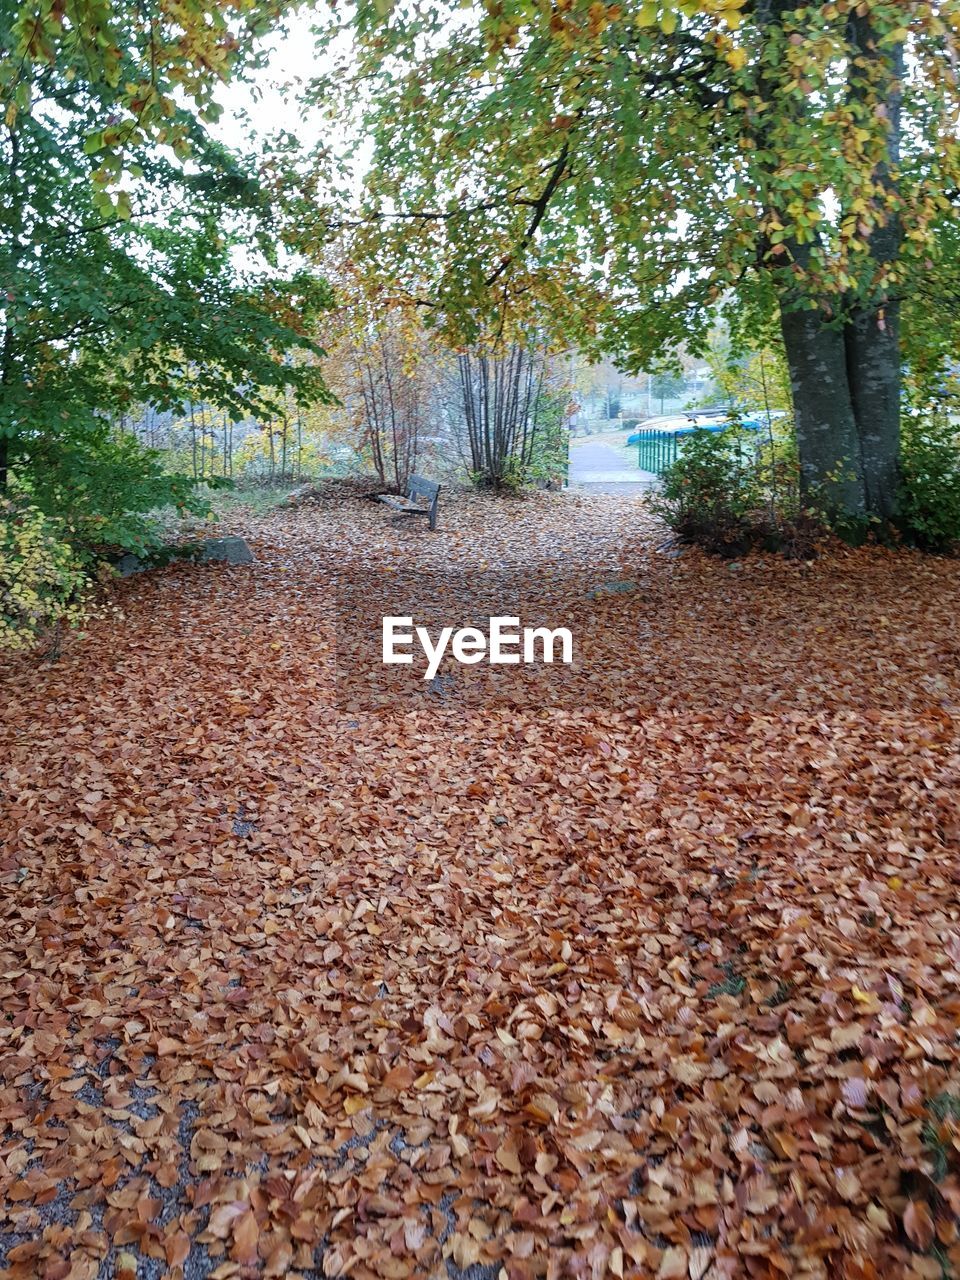 SURFACE LEVEL OF DRY LEAVES FALLEN ON FOOTPATH